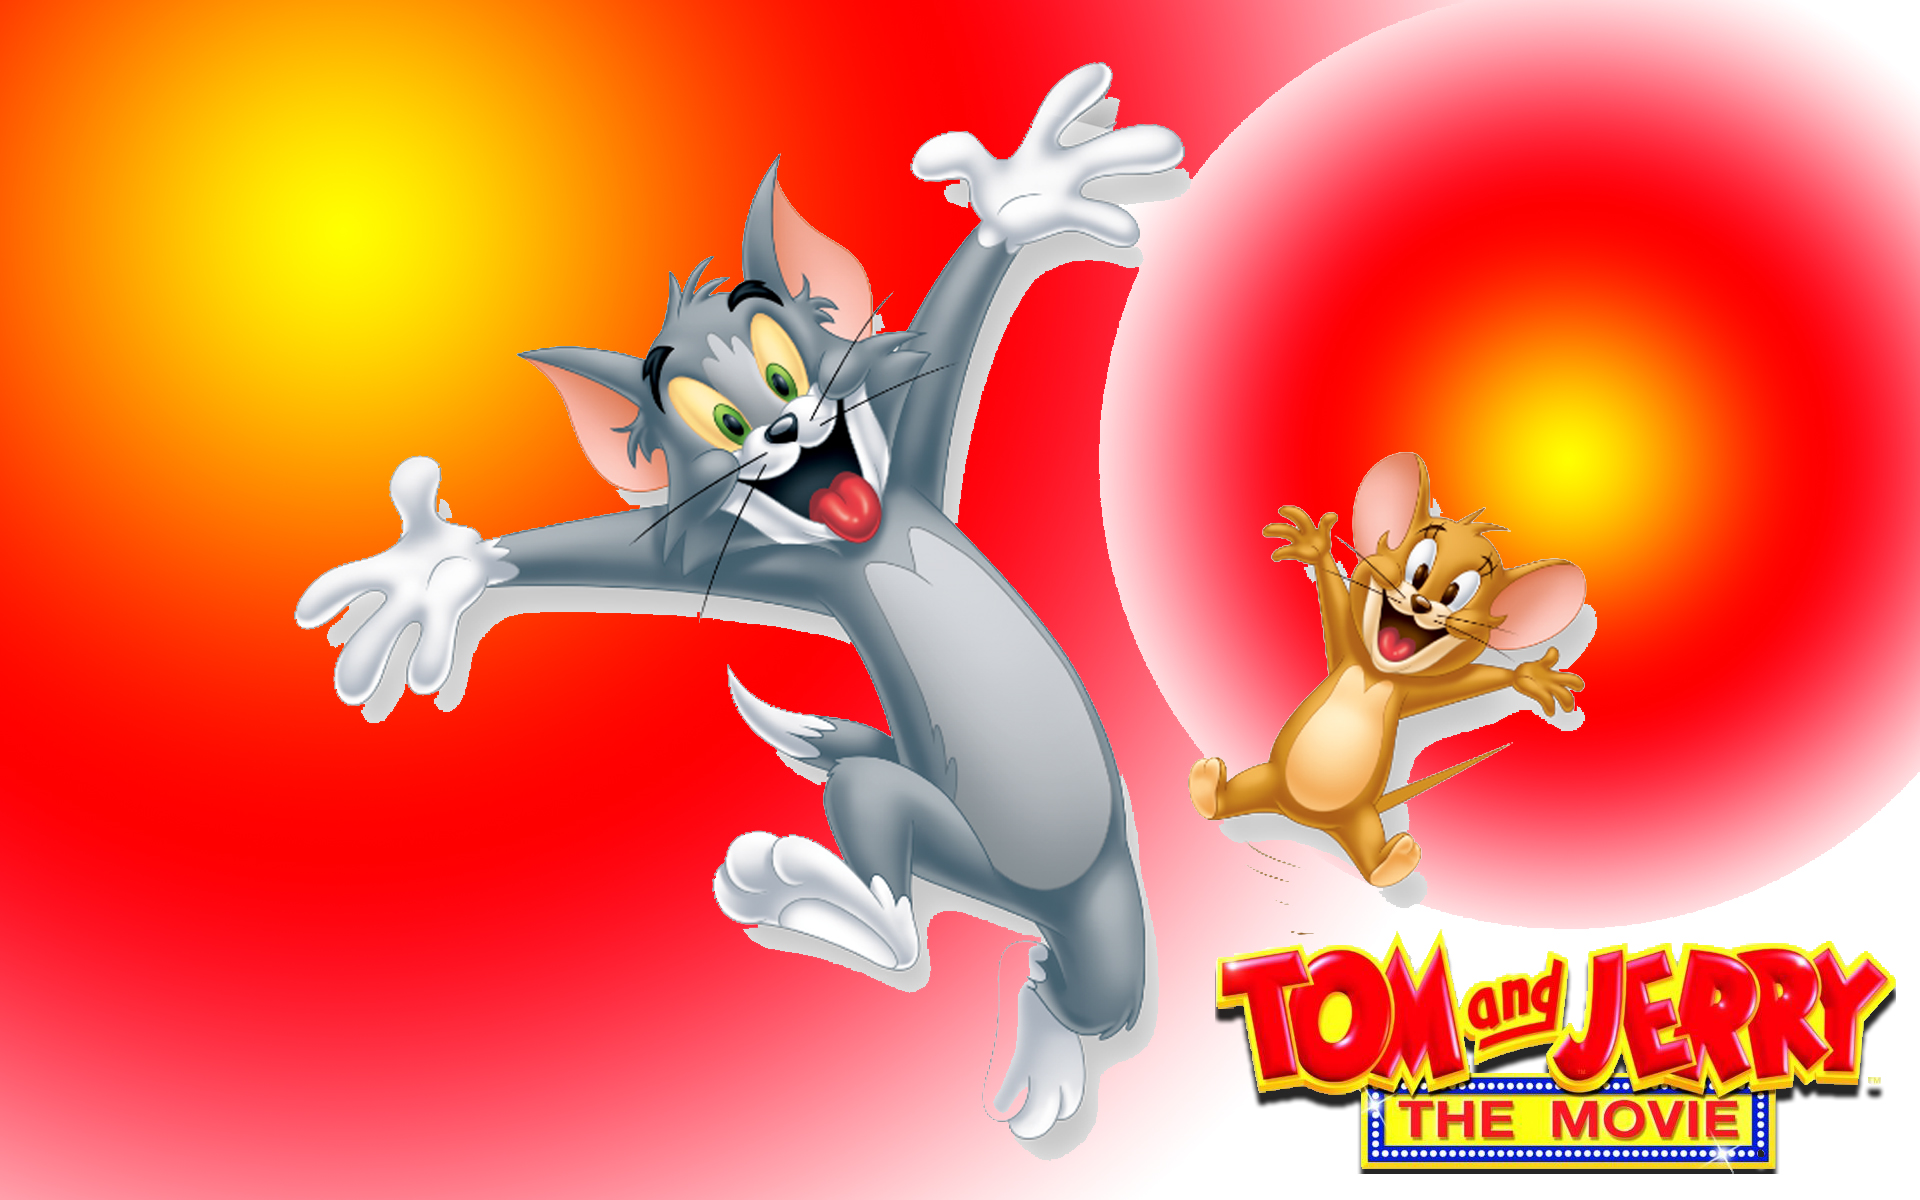 Tom And Jerry The Movie Desktop HD Wallpaper For Mobile Phones Tablet And Pc 1920x1200, Wallpaper13.com